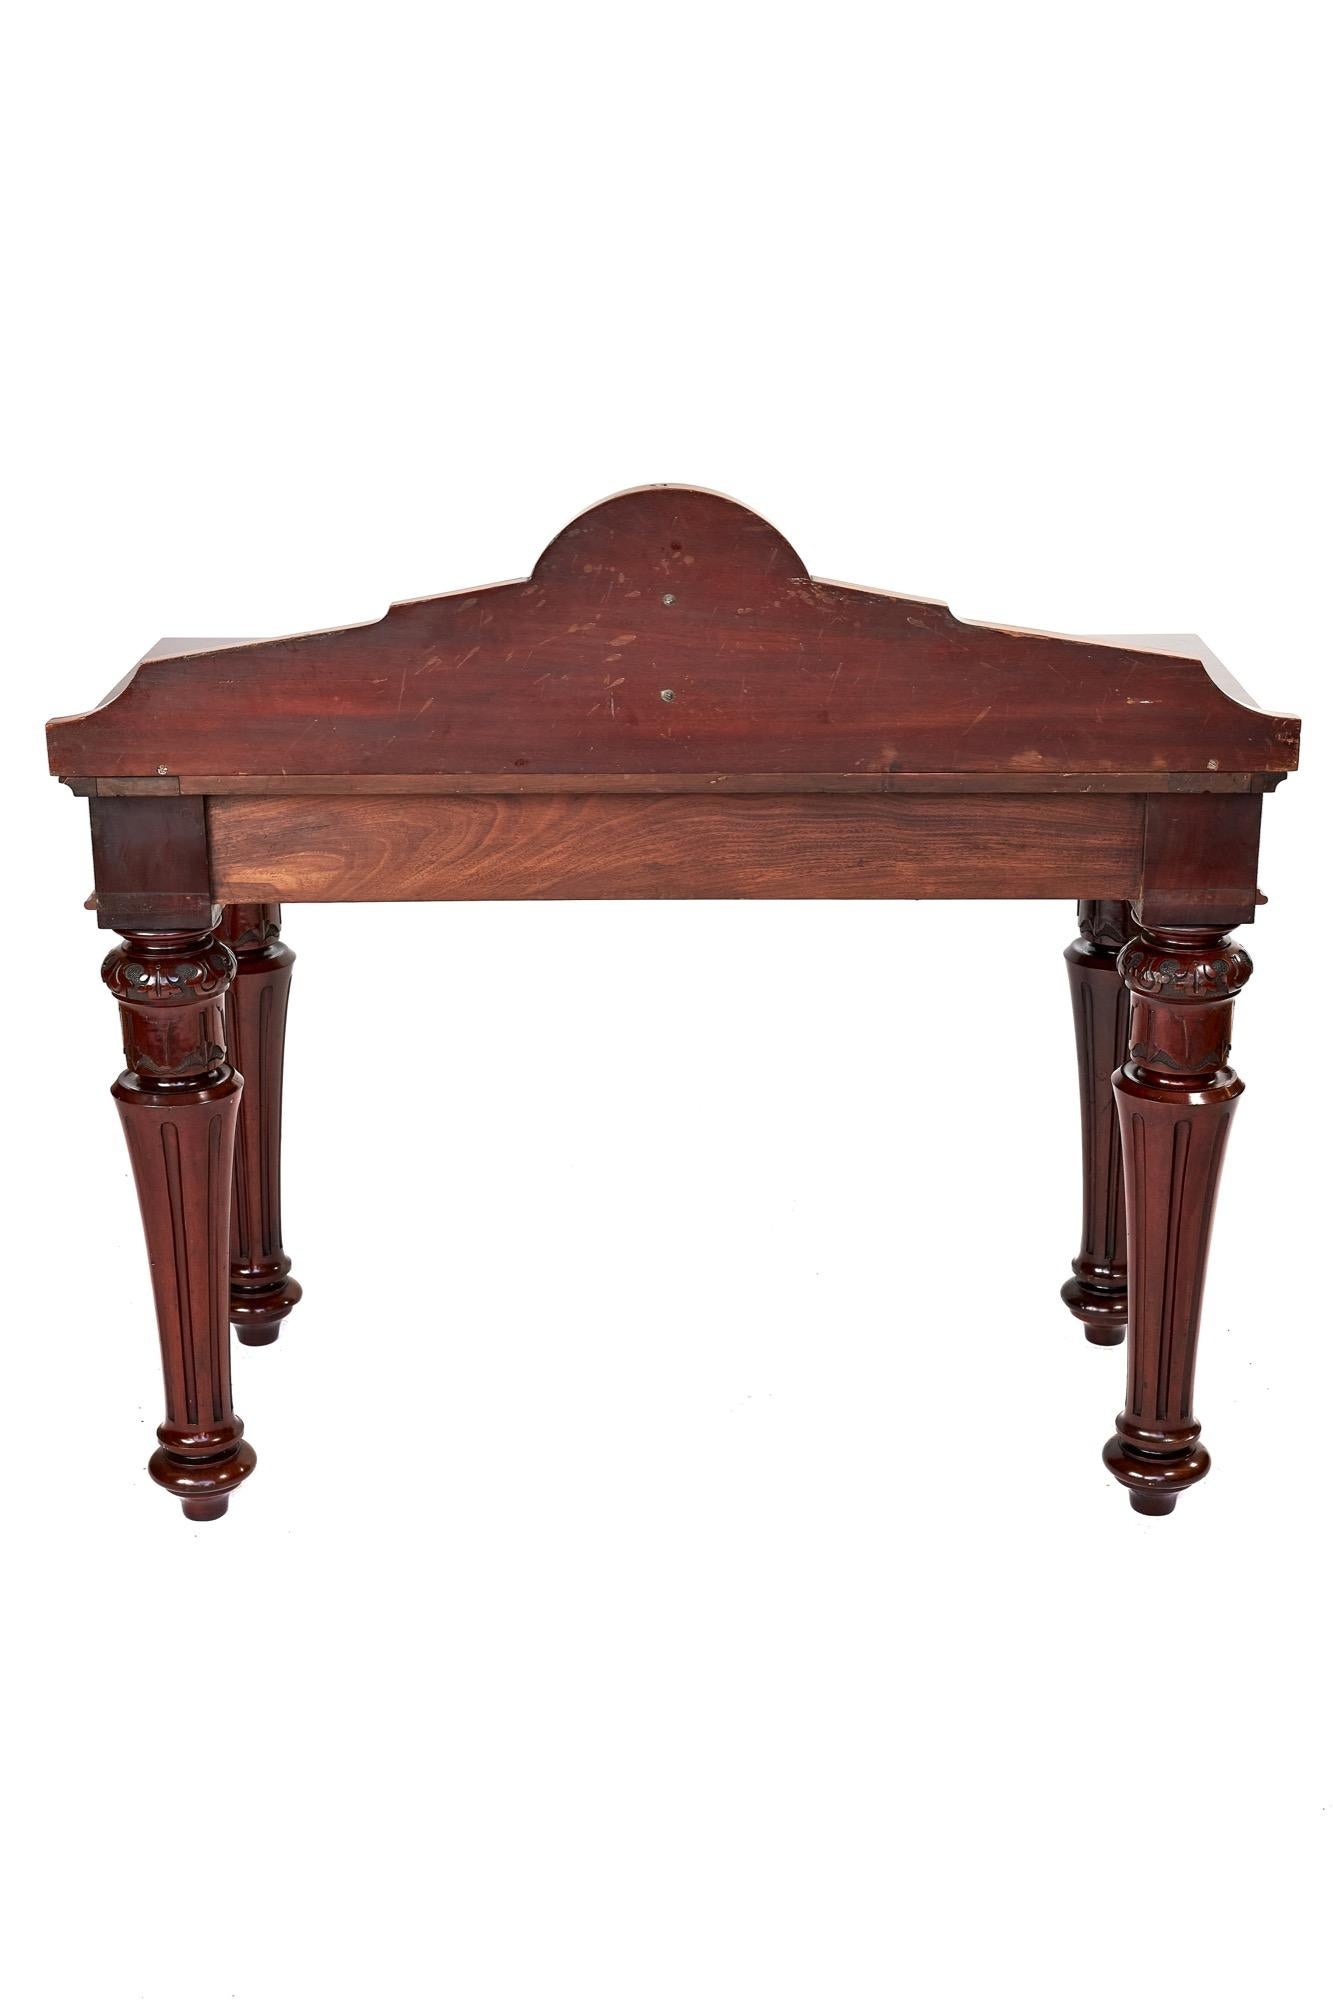 Other Rare 19th Century Antique Victorian Mahogany Hall/Serving Table